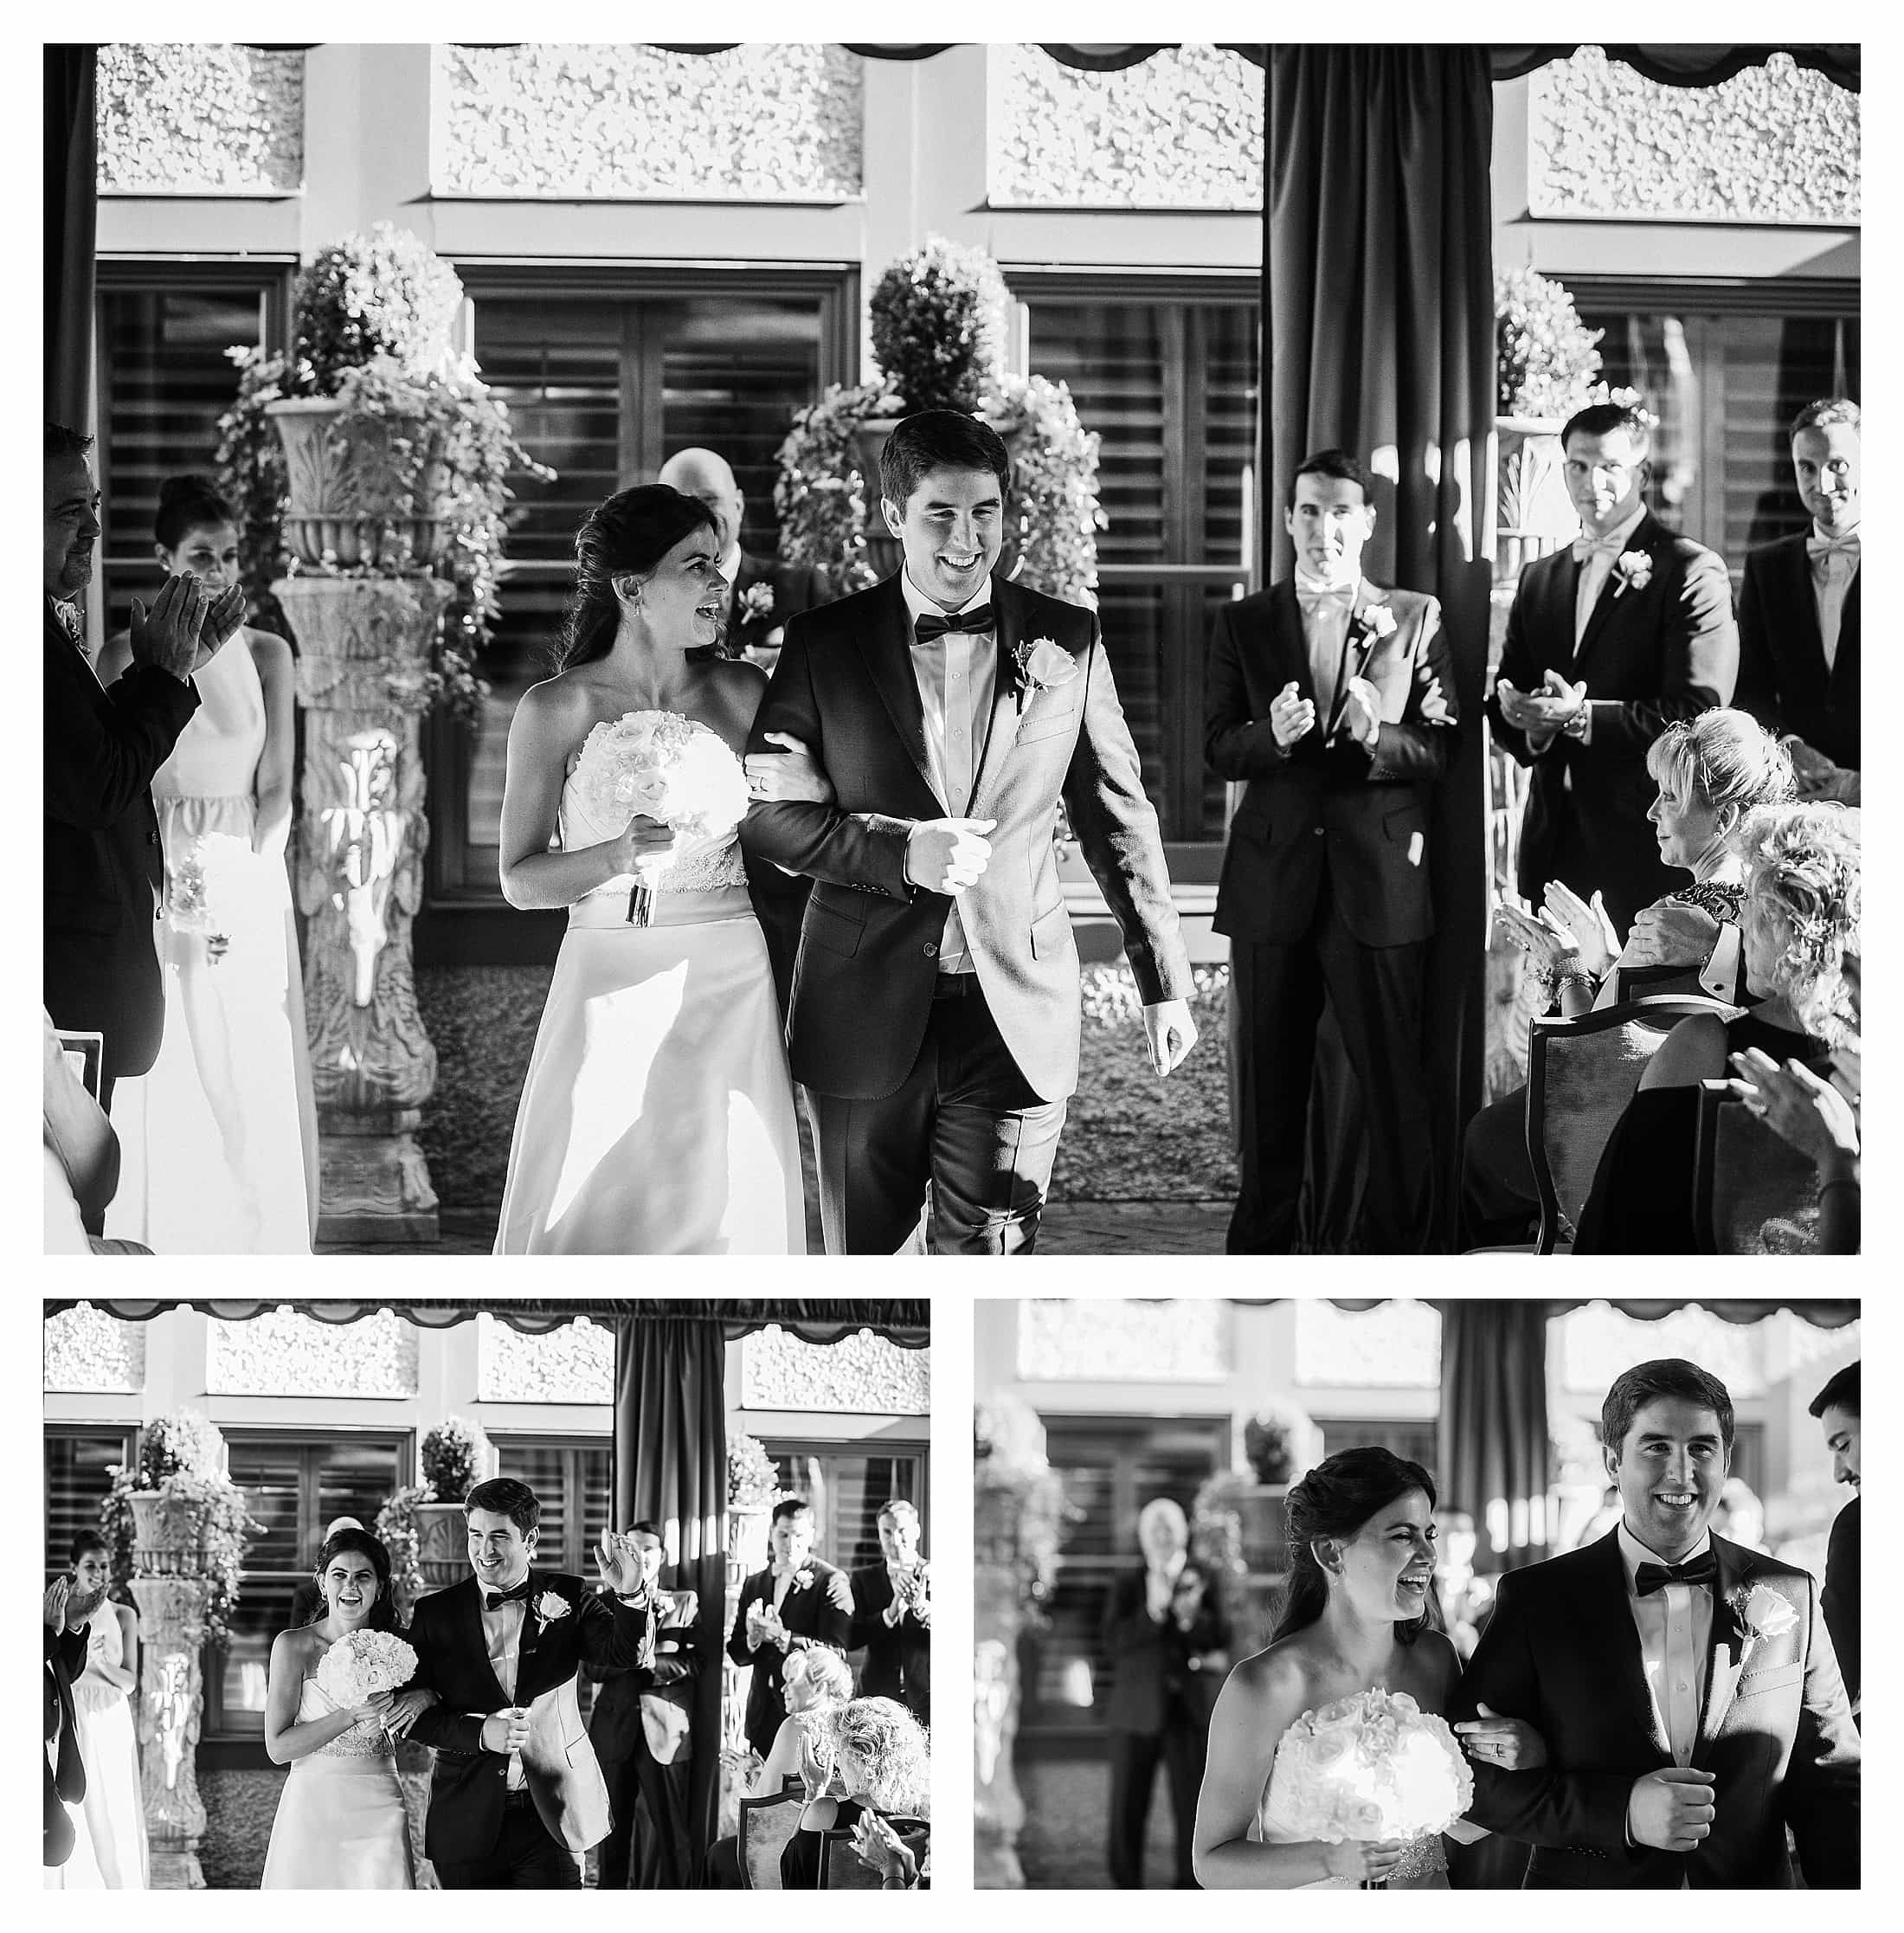 Bride and groom exiting ceremony at Grand Bohemian Asheville. Kathy Beaver Black and White wedding photography.